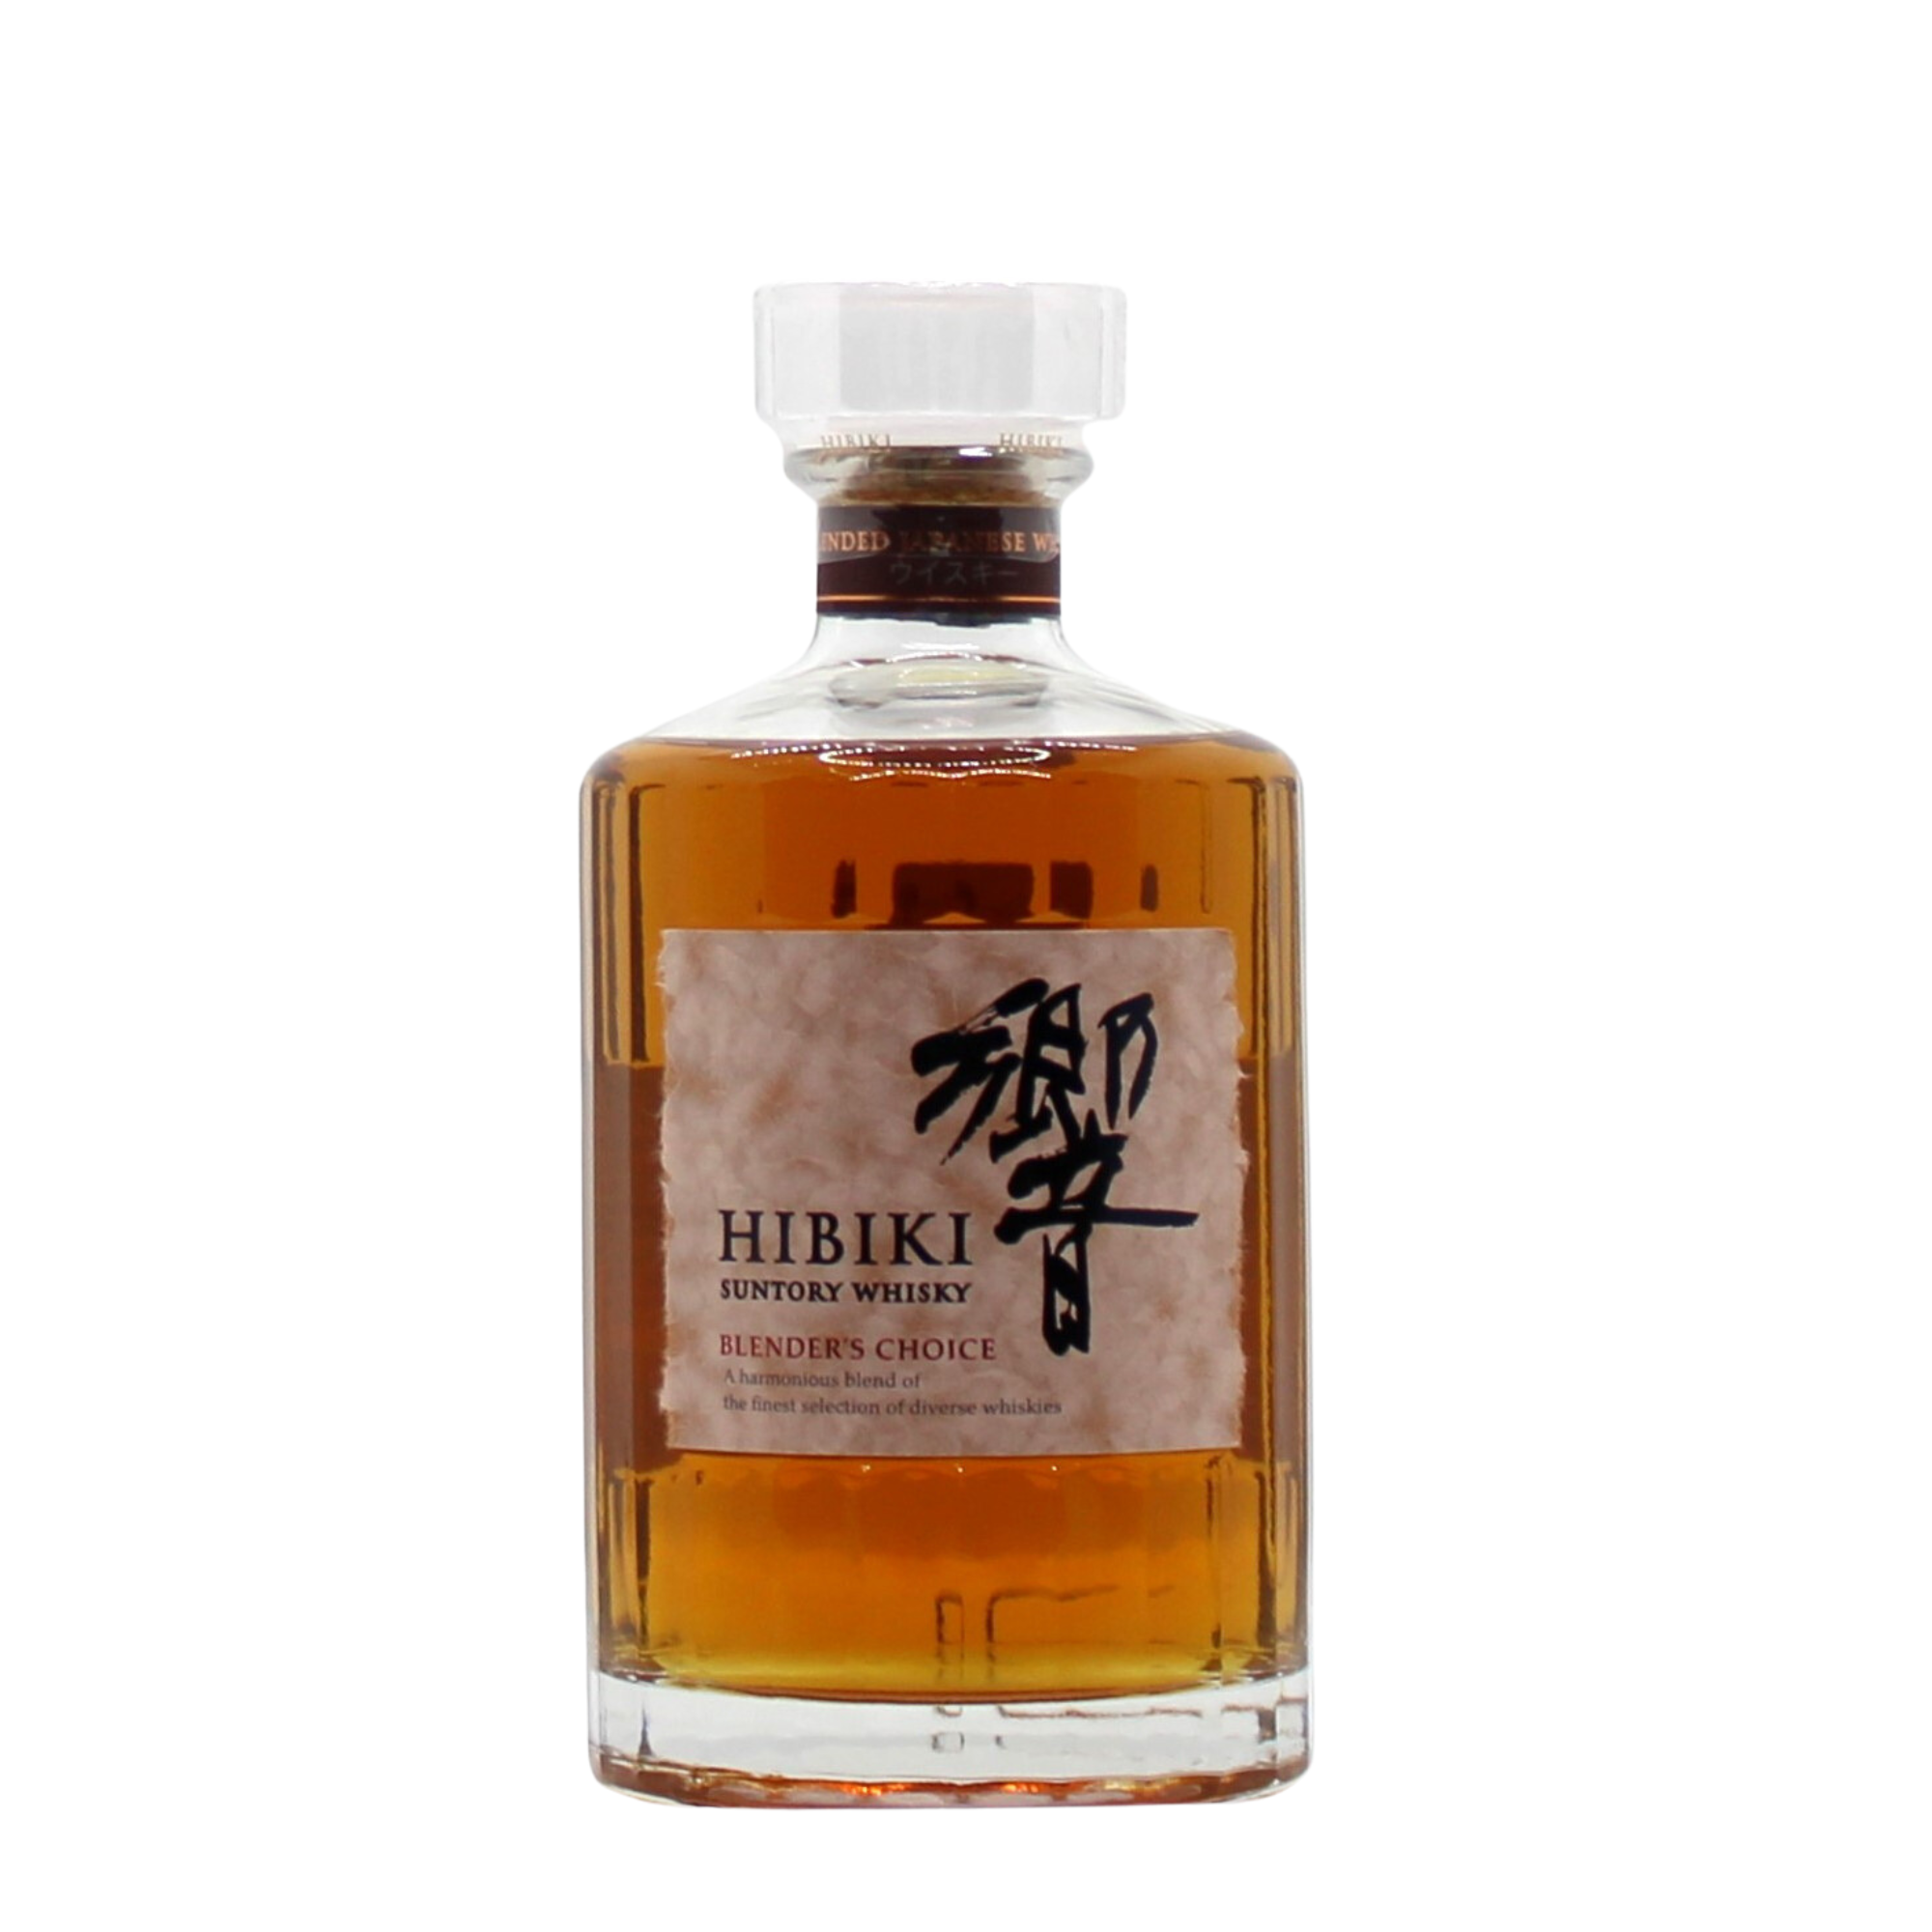 Released around September 2018, soon after the Hibiki 17 was discontinued, this is rumoured to/believed to be the &quot;replacement&quot;. A harmonious blend of Japanese malt and grain whiskies from Yamazaki, Hakushu and Chita presented in the traditional Hibiki 24 faceted bottle and reportedly aged between 12 and 30 years with an average age of around 15 years.